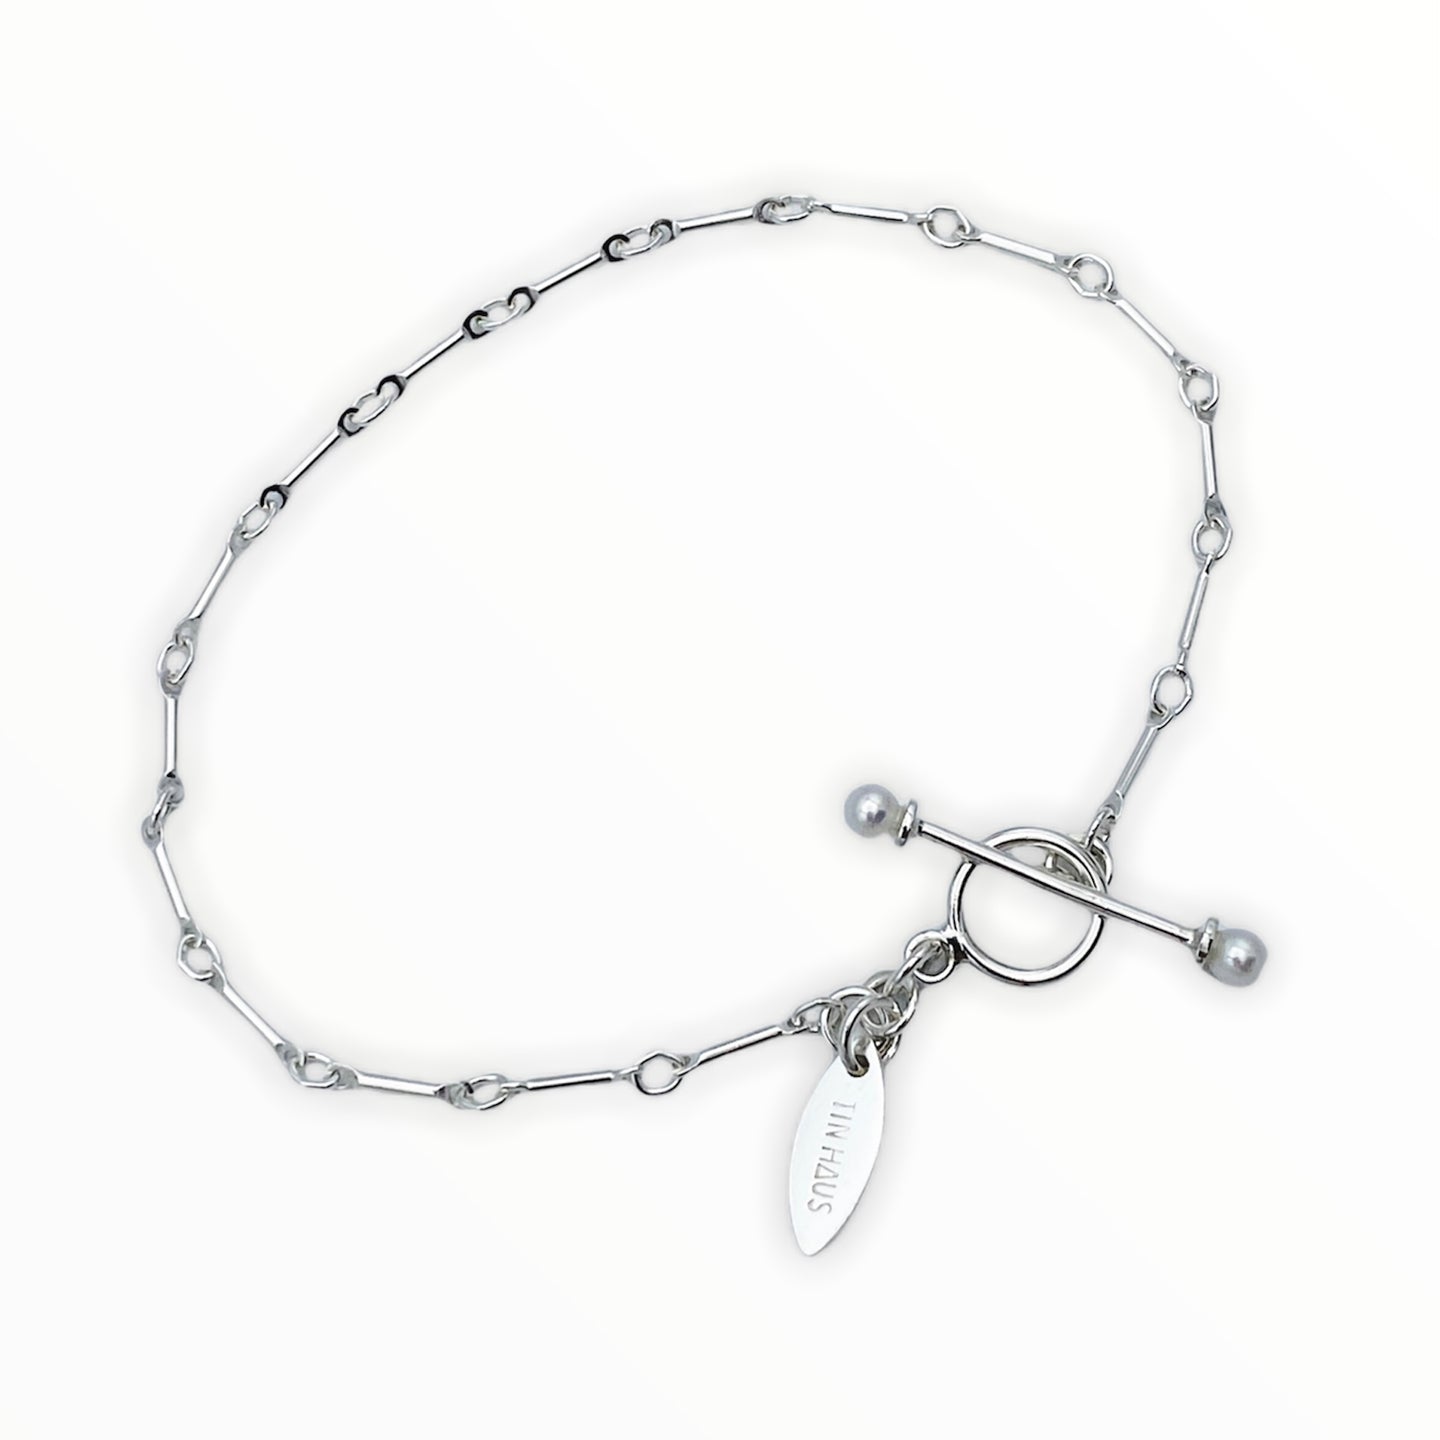 Darling Pearl Toggle Bar Chain Bracelet - Sterling Silver, Freshwater Pearls - TIN HAUS